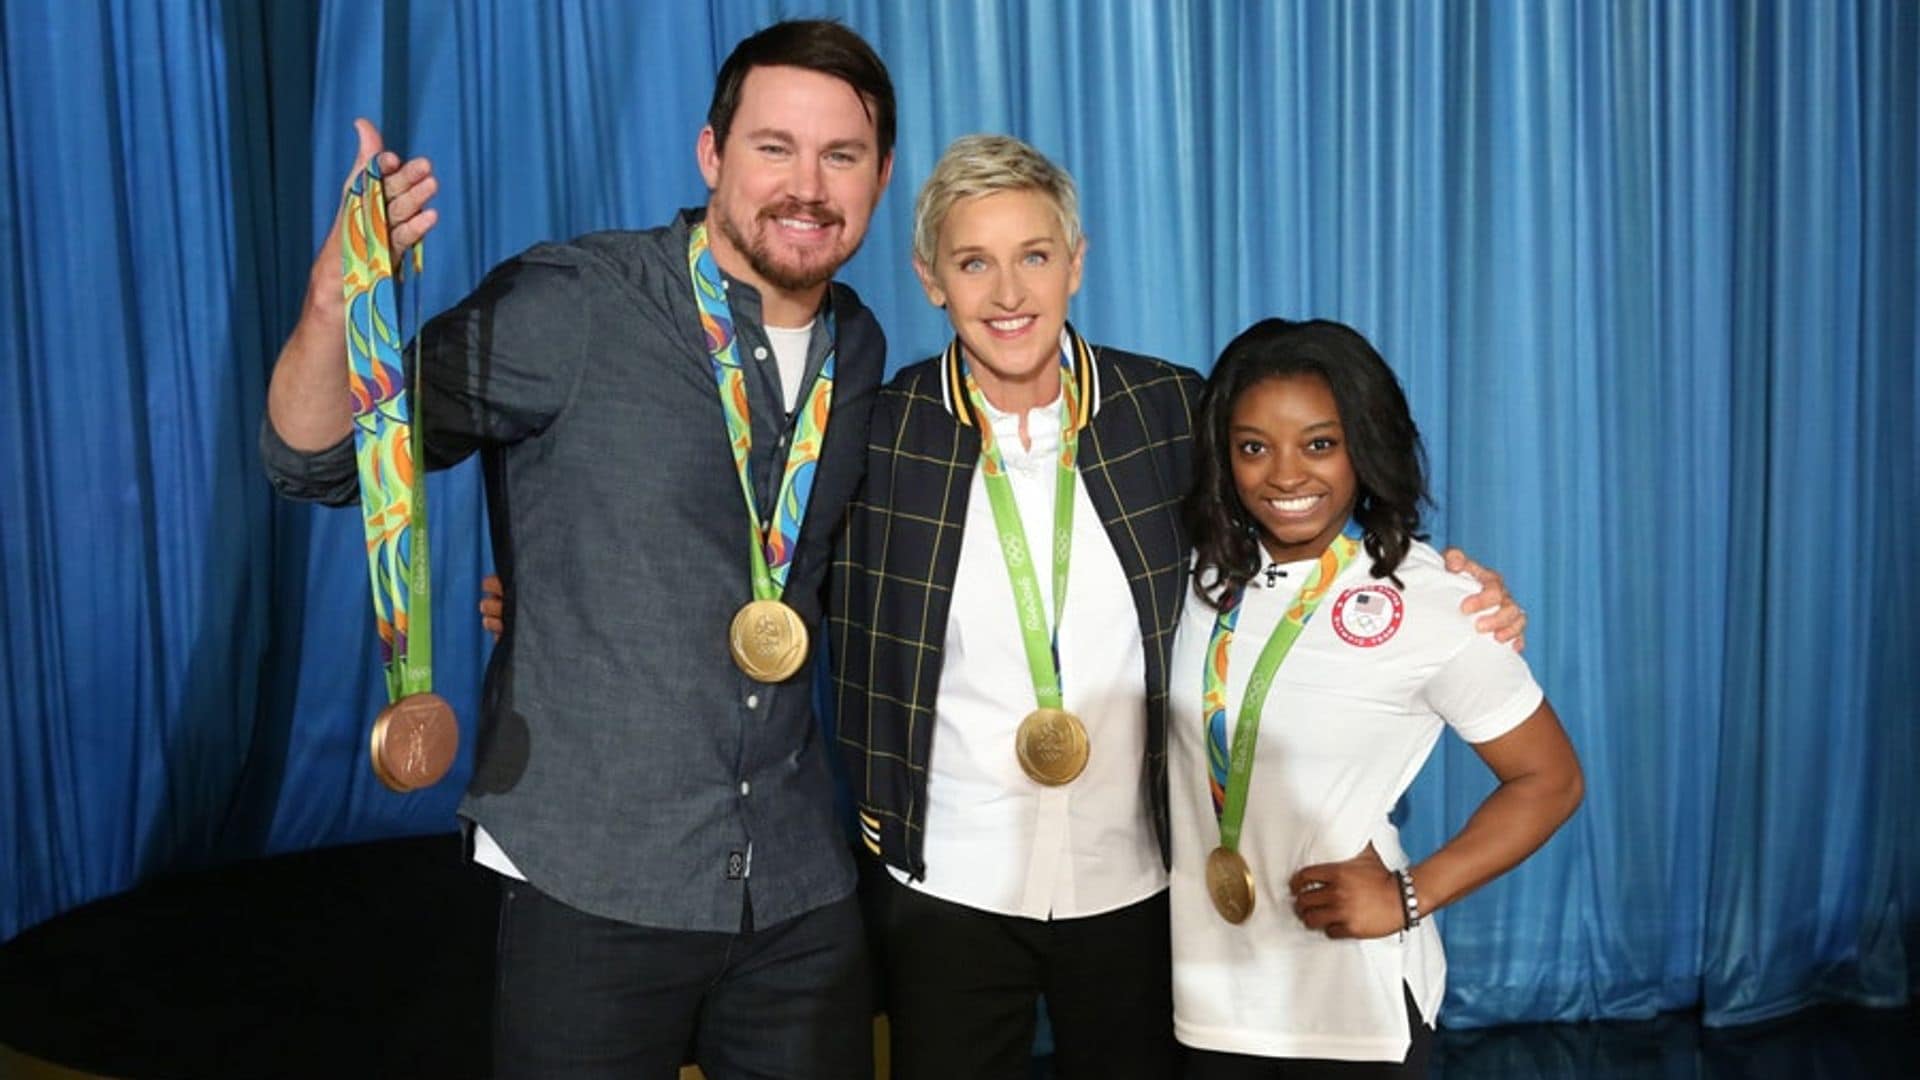 Channing fangirled over the Olympic champ during the season 14 premiere of <i>The Ellen DeGeneres Show</i>.
<br>
Photo: Michael Rozman/Warner Bros